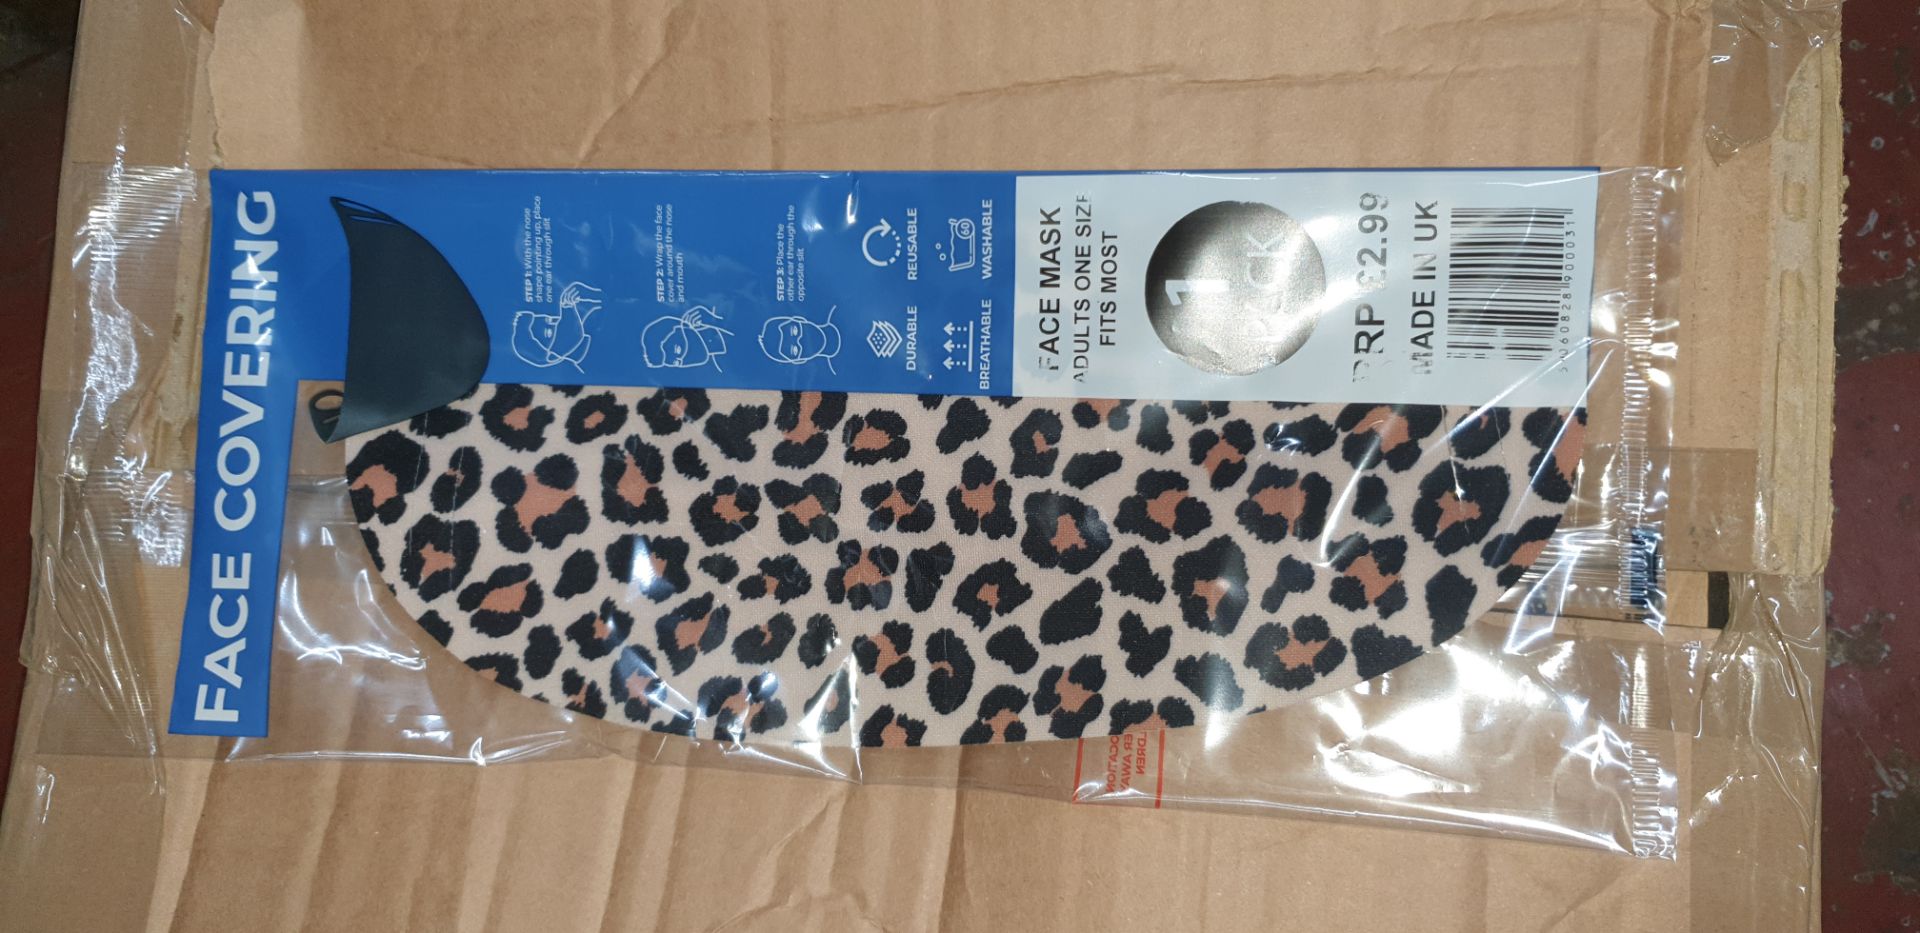 100 off adult face masks, individually packaged, in leopard print - Image 2 of 7